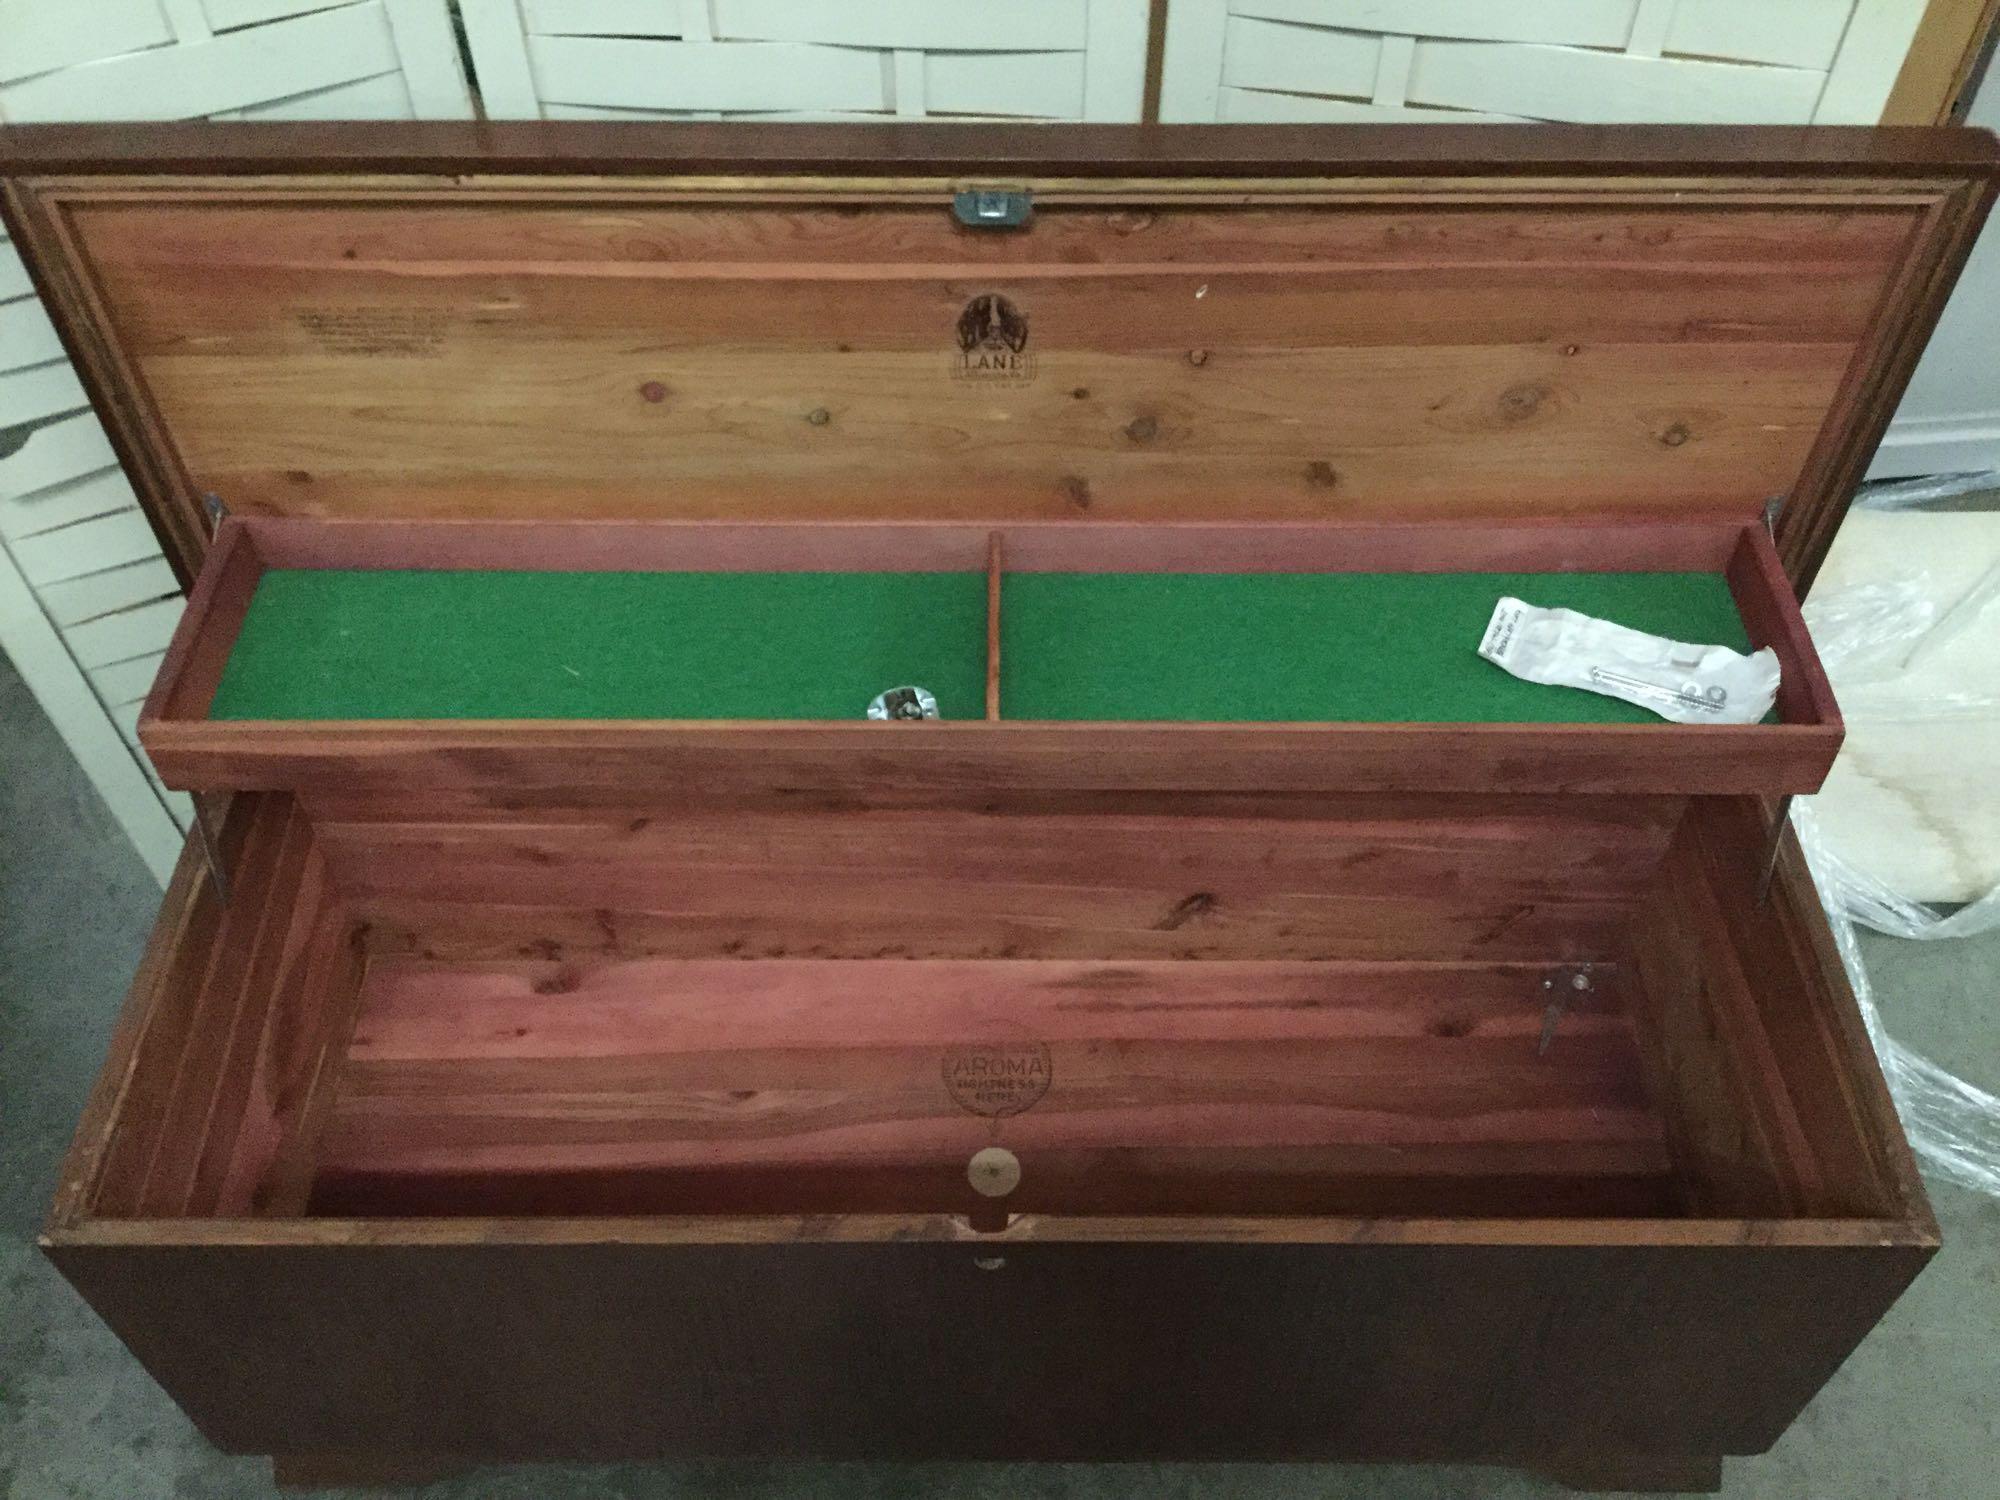 Lane cedar chest. Lock has been removed but is included. Measures approx 47x20x18 inches.